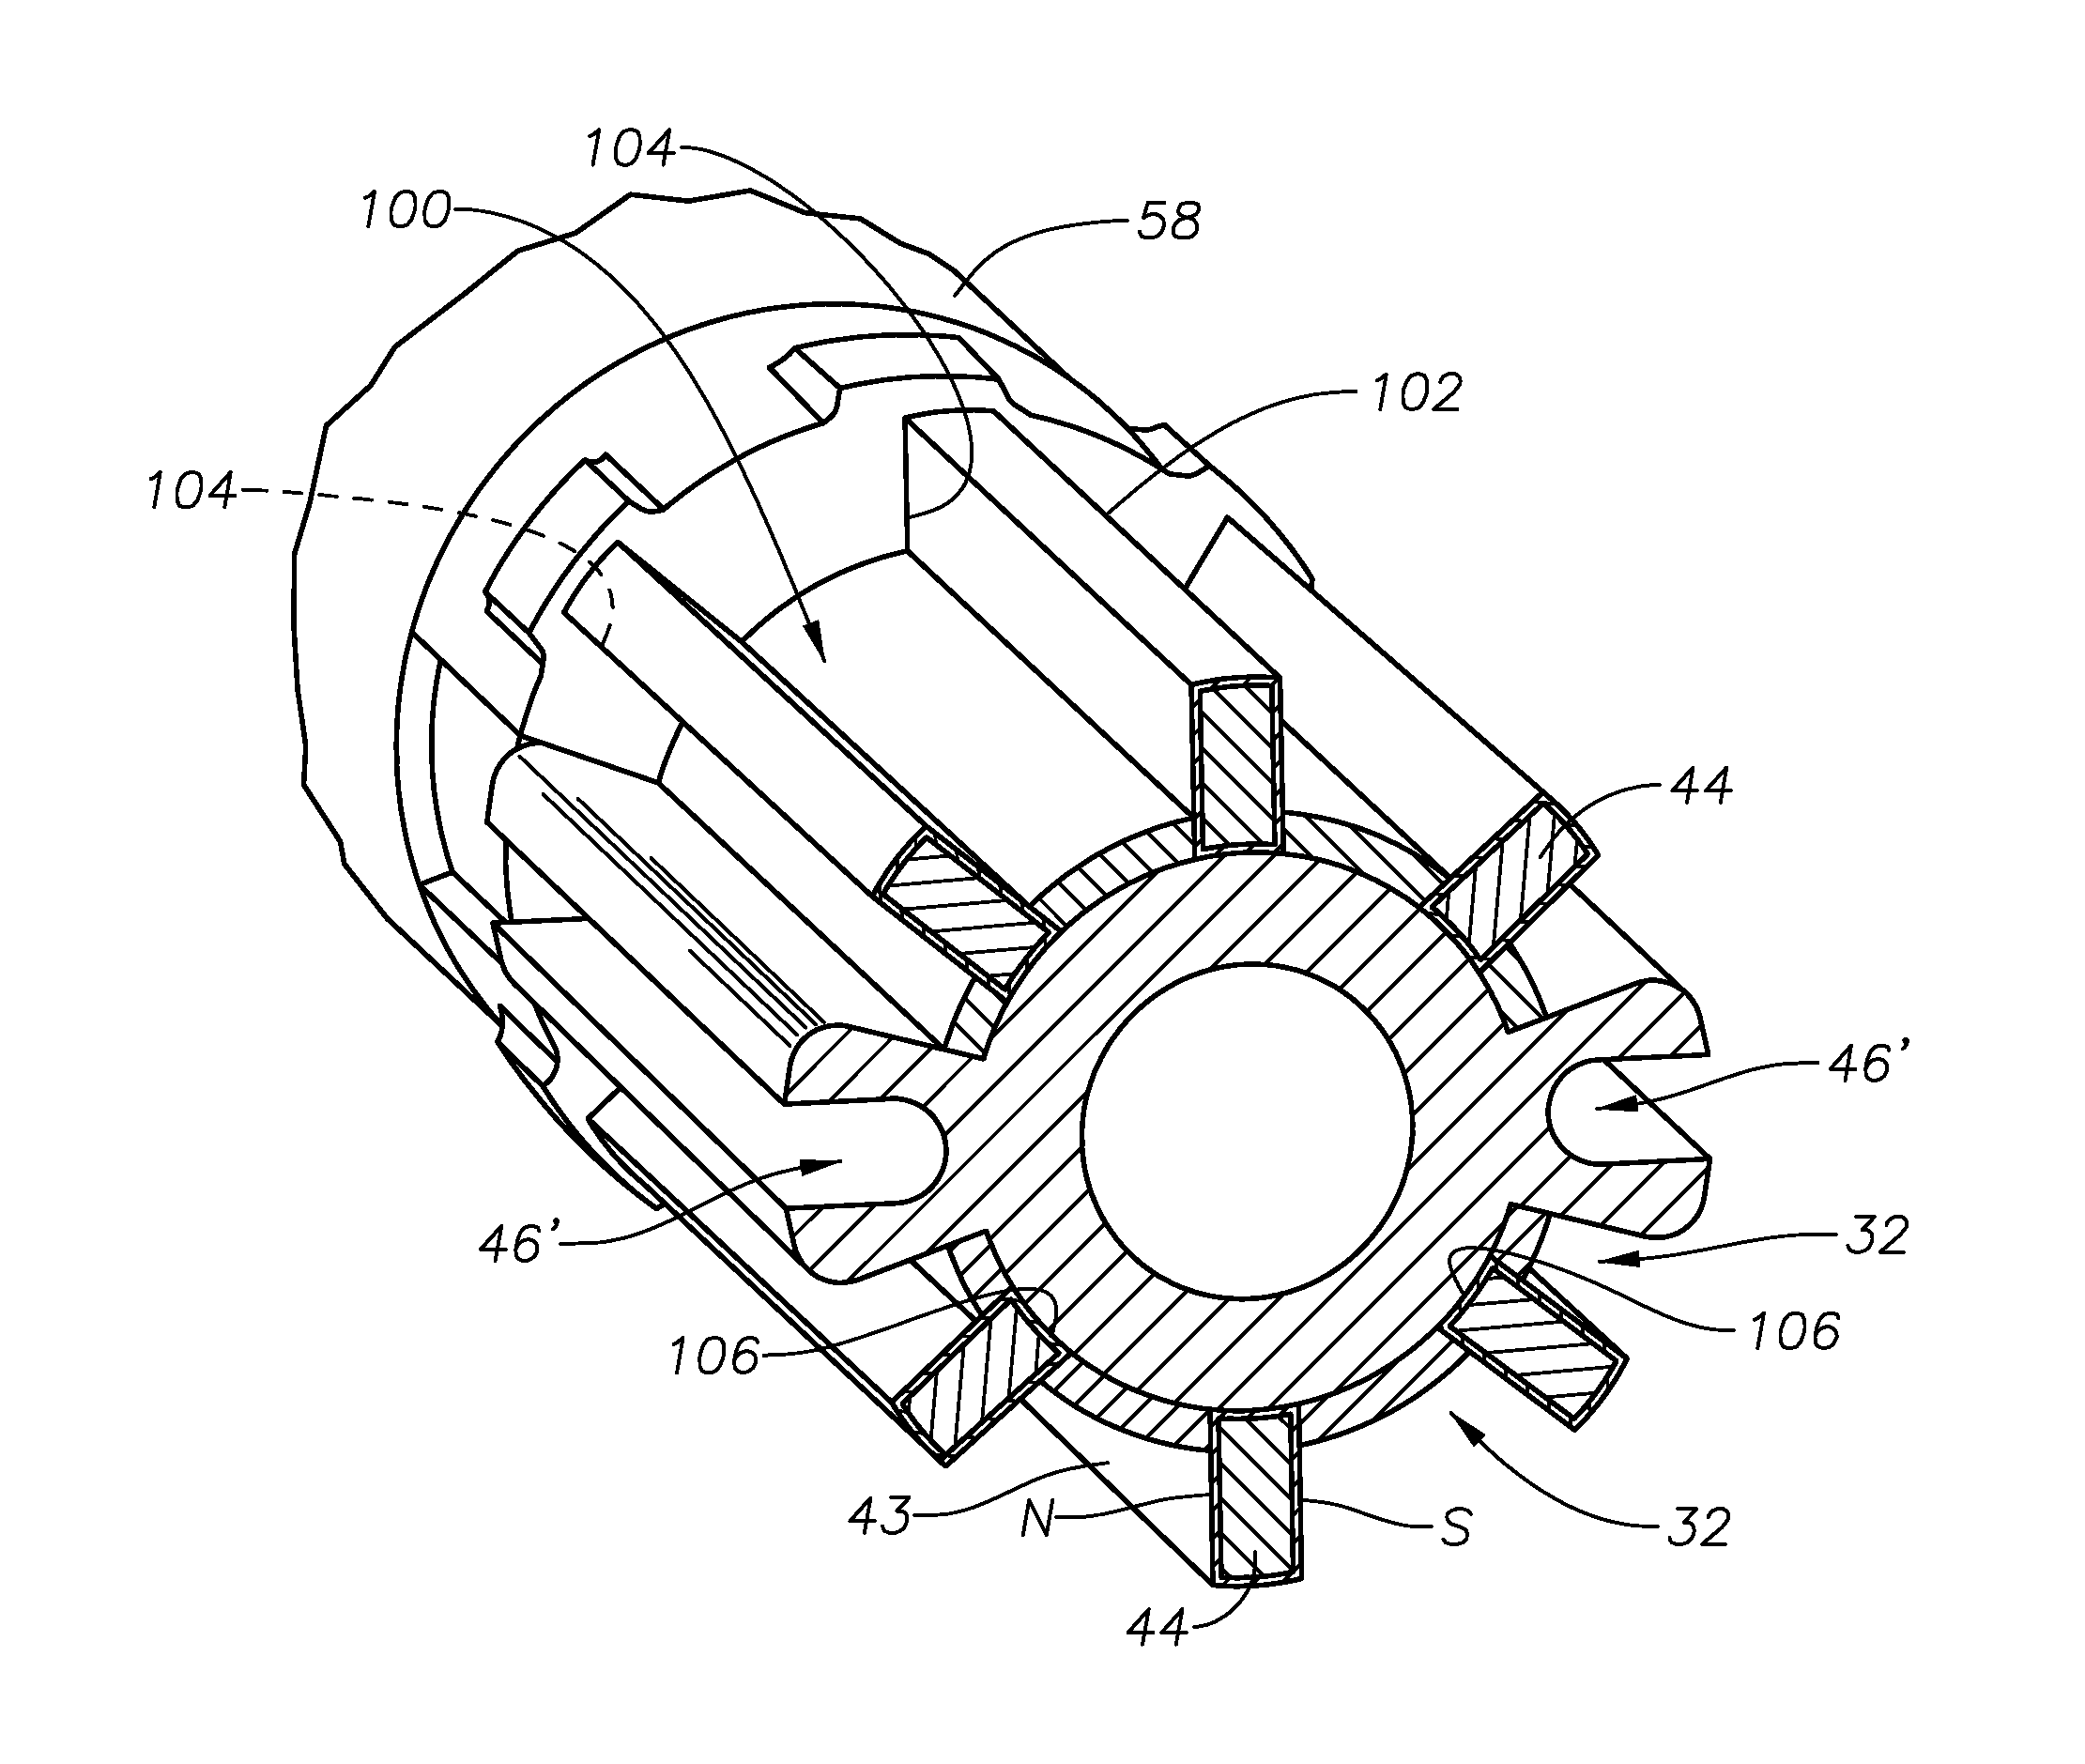 Retaining and isolating mechanisms for magnets in a magnetic cleaning tool